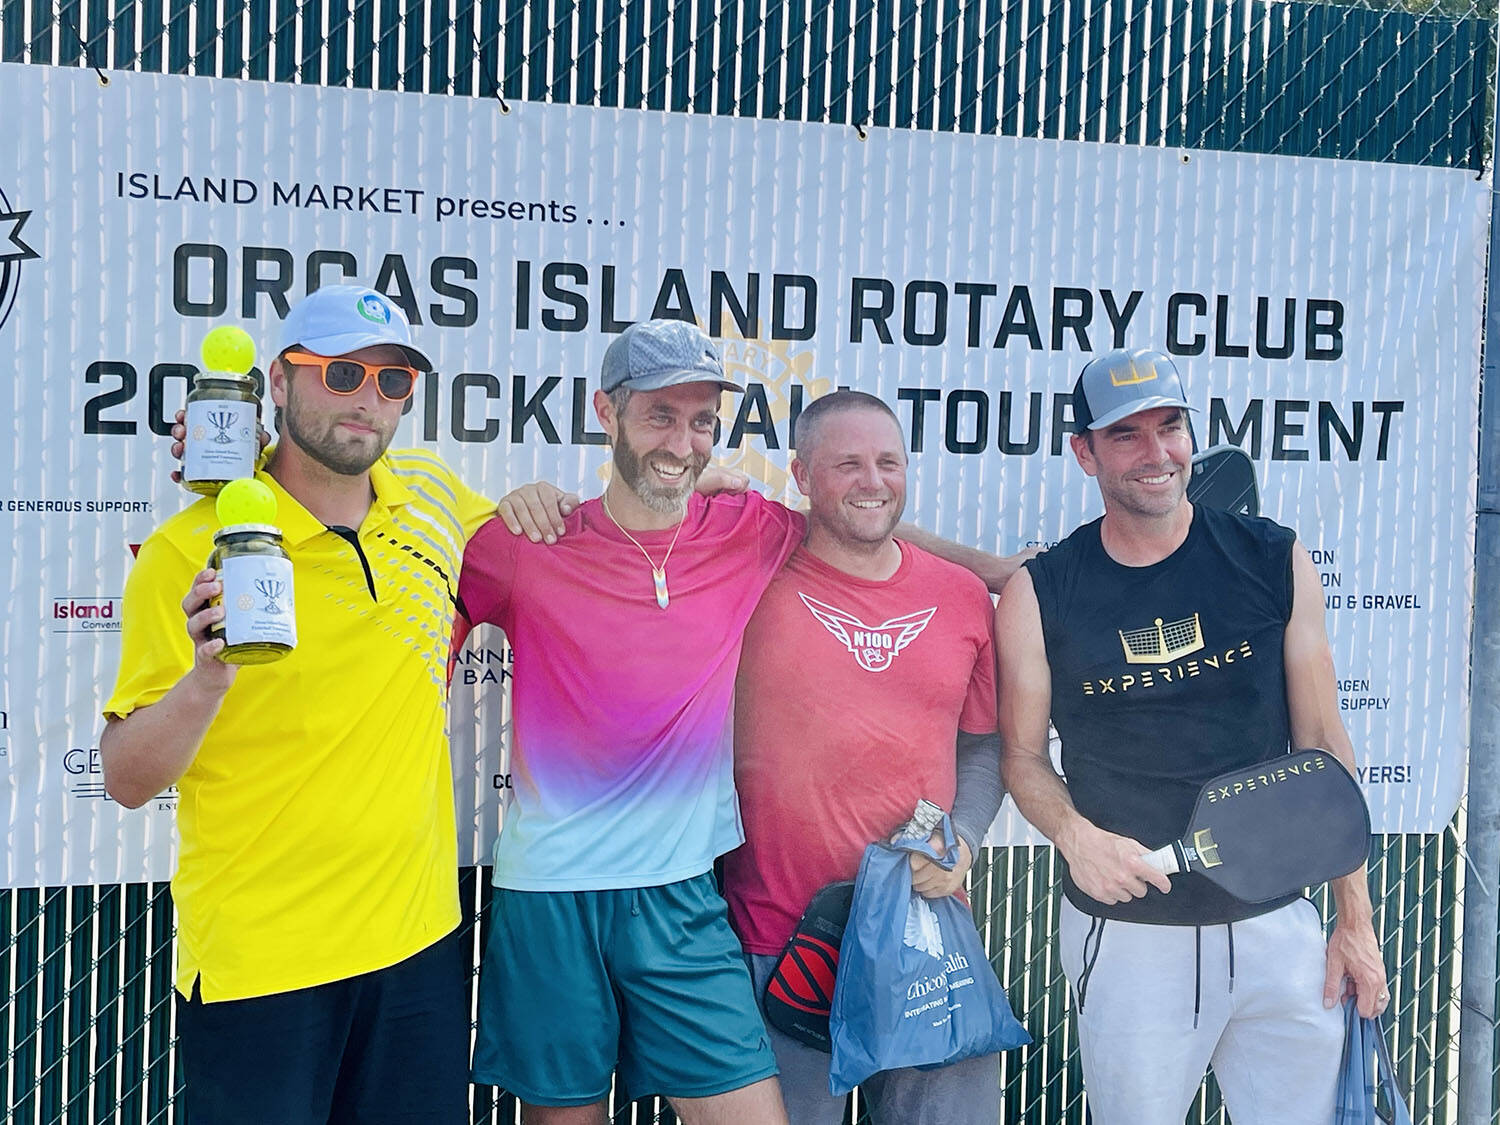 Group A Men’s Doubles finishers: Michael Harlow and Valerie Alexandov (second place), and Nigel Oswald and Jemuel Morris (first place).